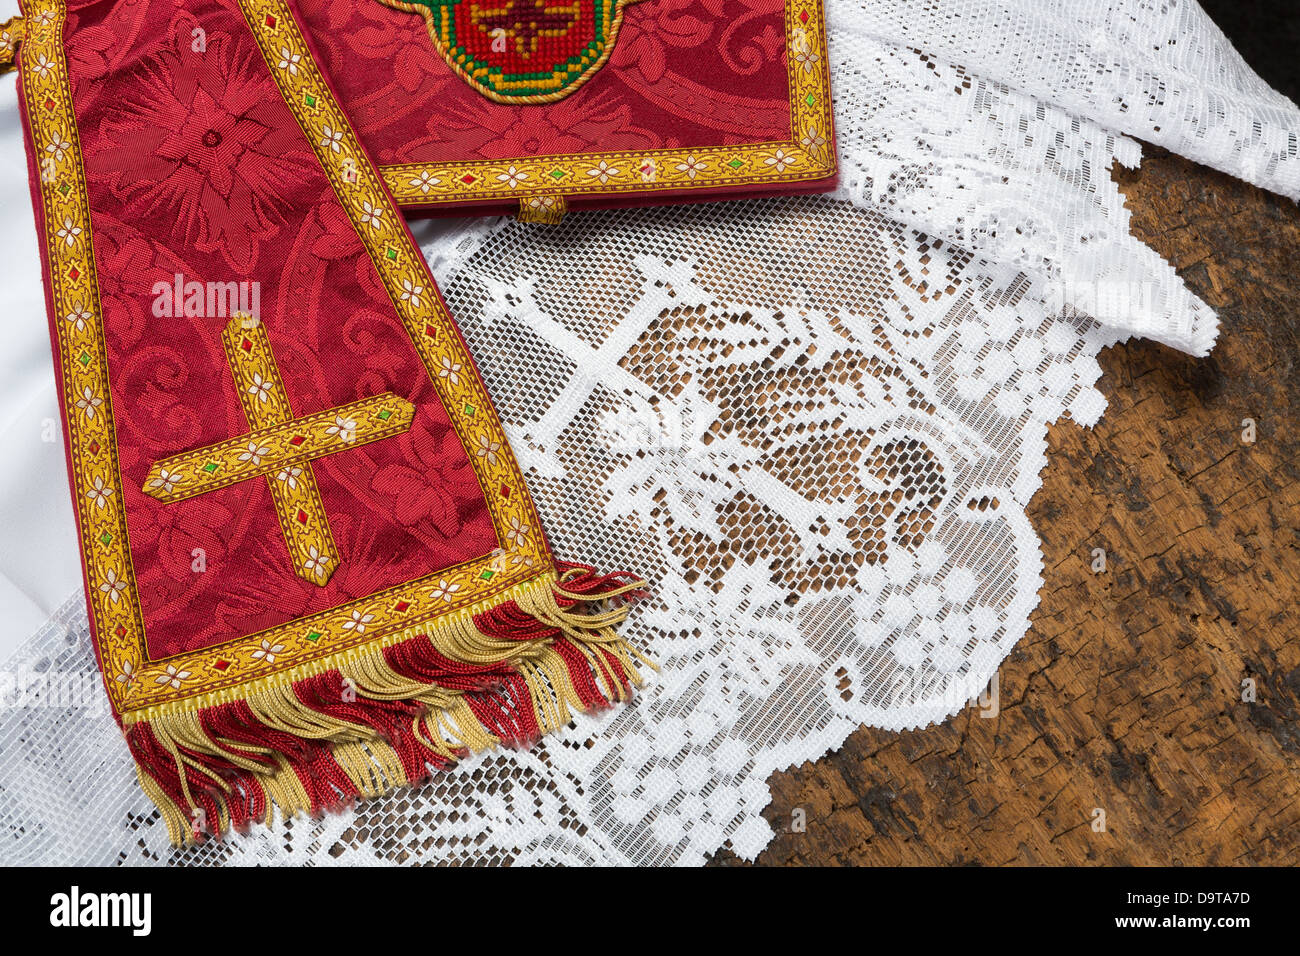 19th century red damask chalice veil and maniple on a white lace catholic priest surplice Stock Photo